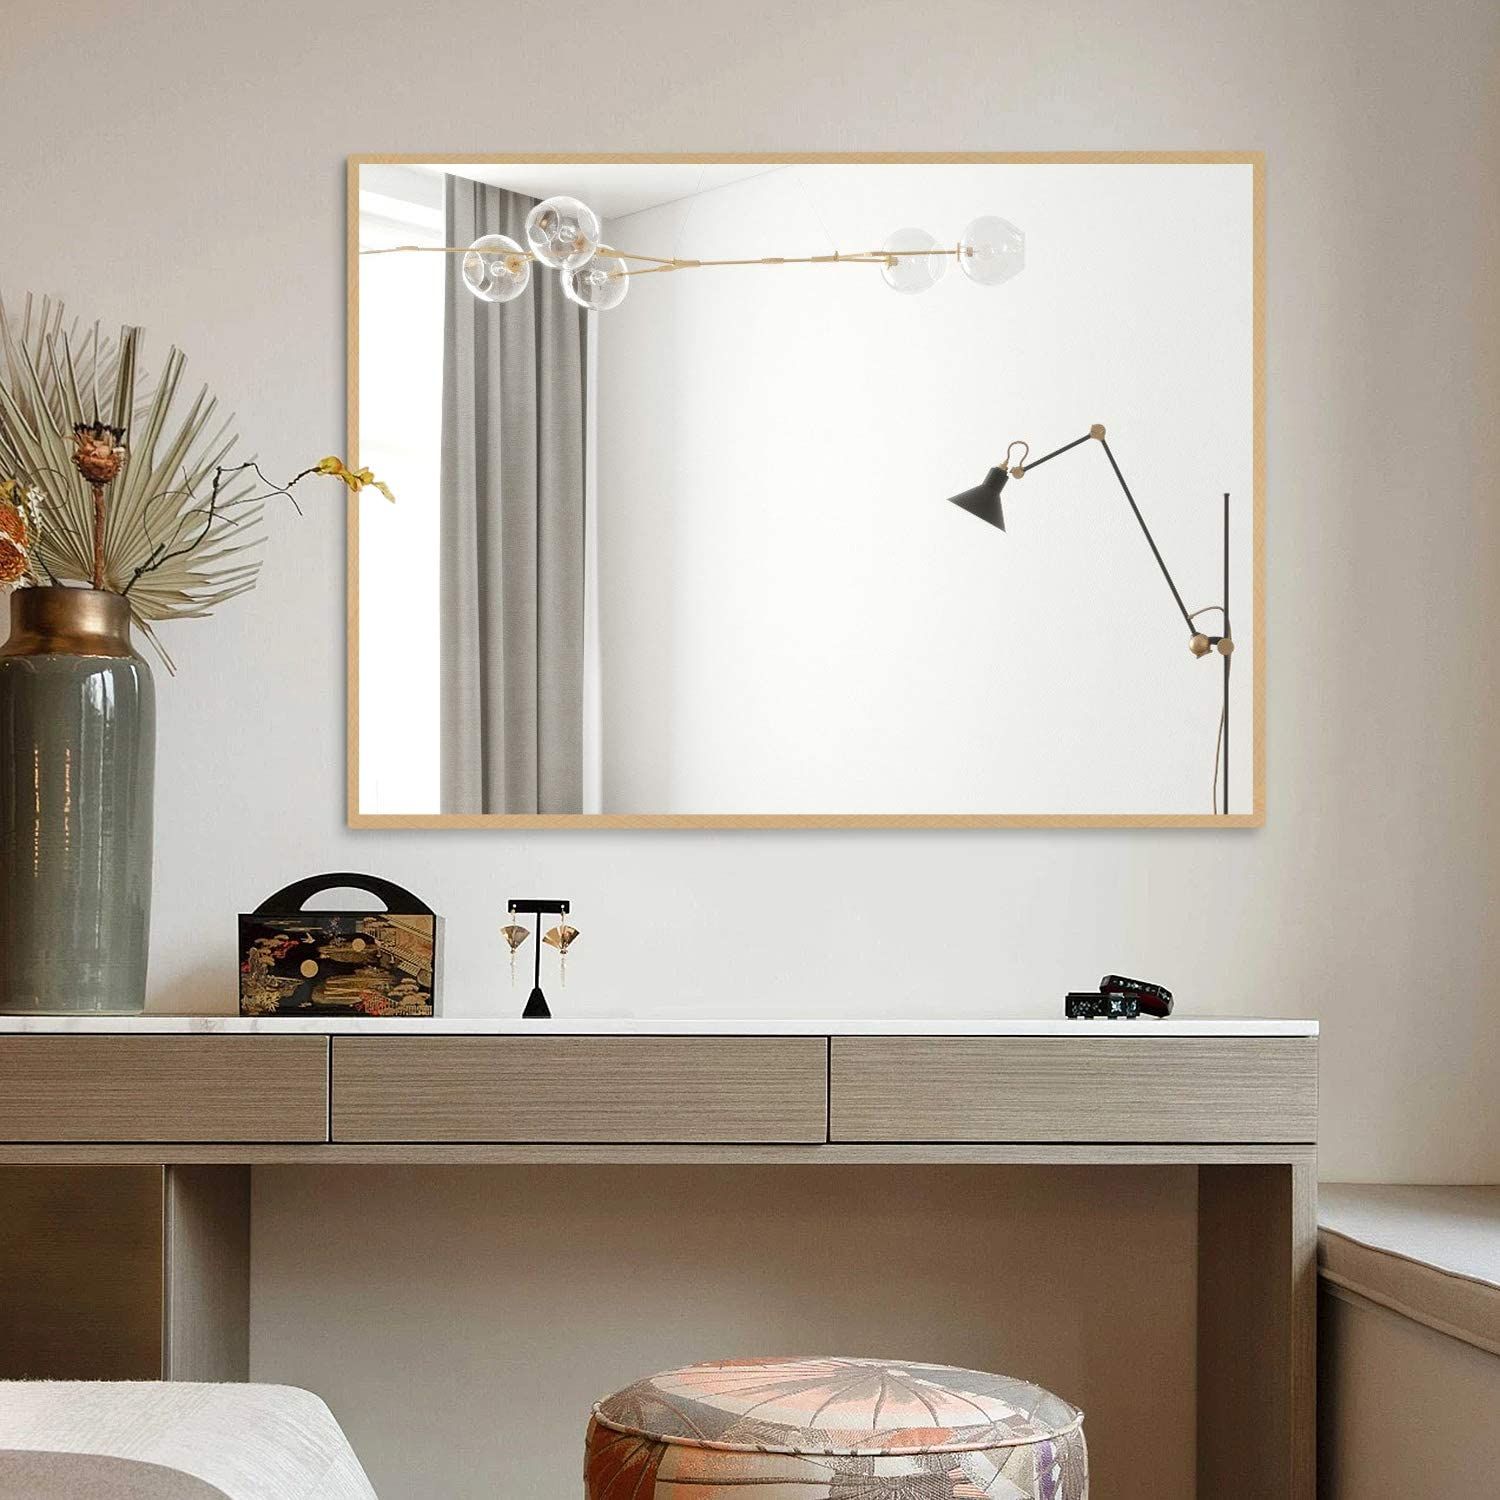 Mirrors For Wall Decor Rectangular Mirror Bathroom Wall Mounted Make Up Pertaining To Clear Wall Mirrors (View 5 of 15)